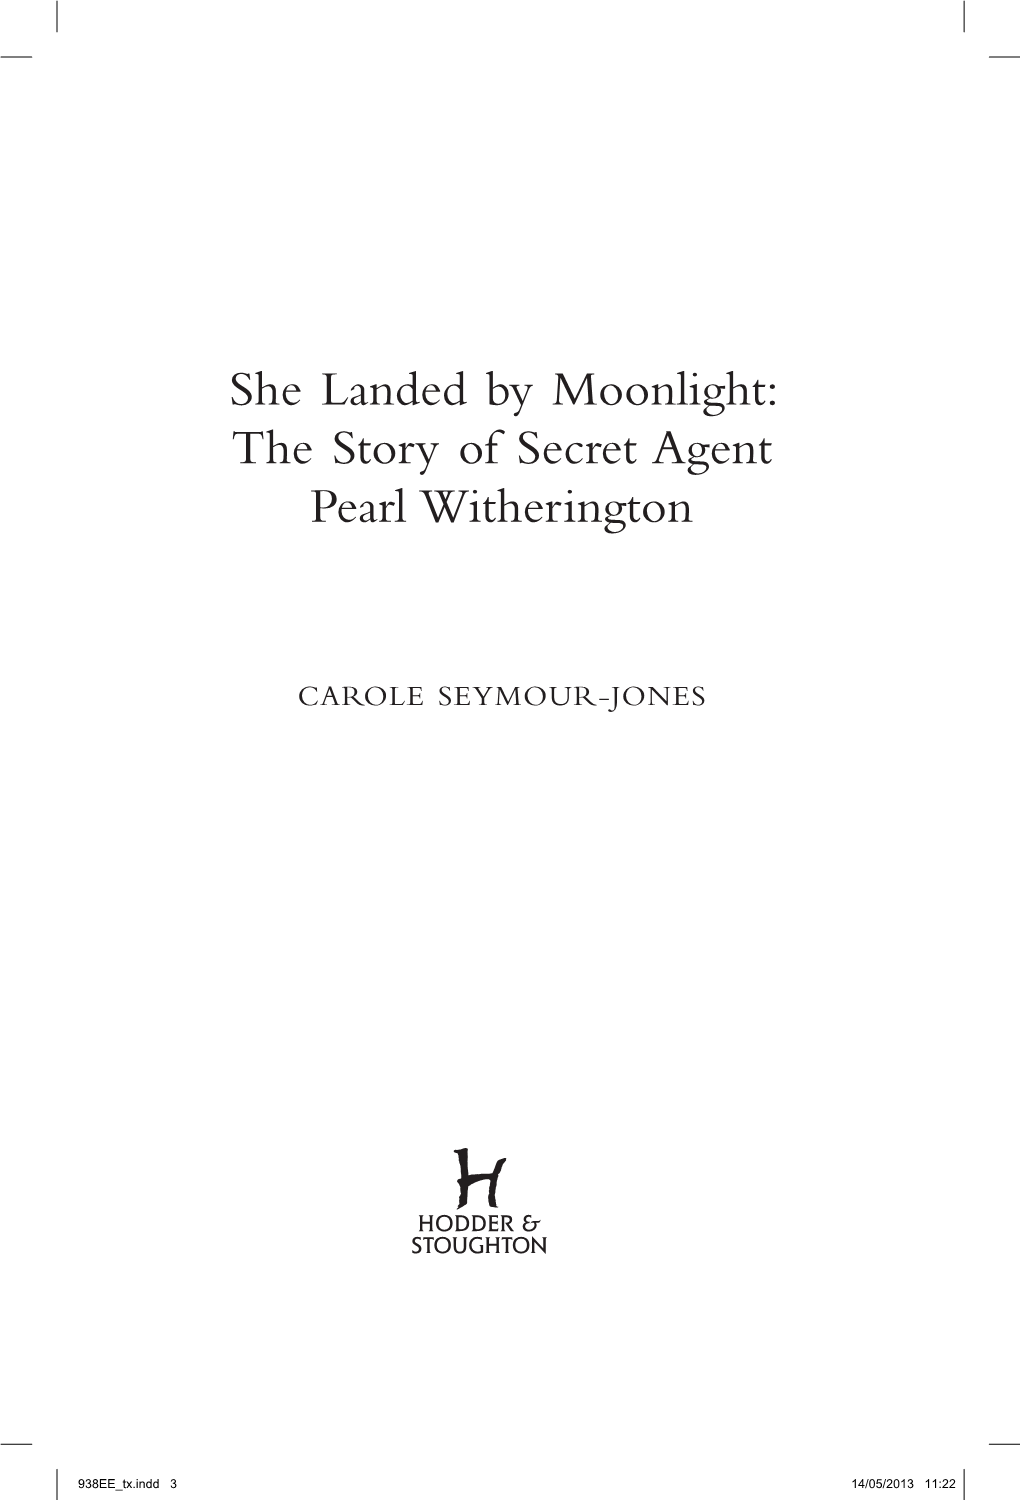 The Story of Secret Agent Pearl Witherington